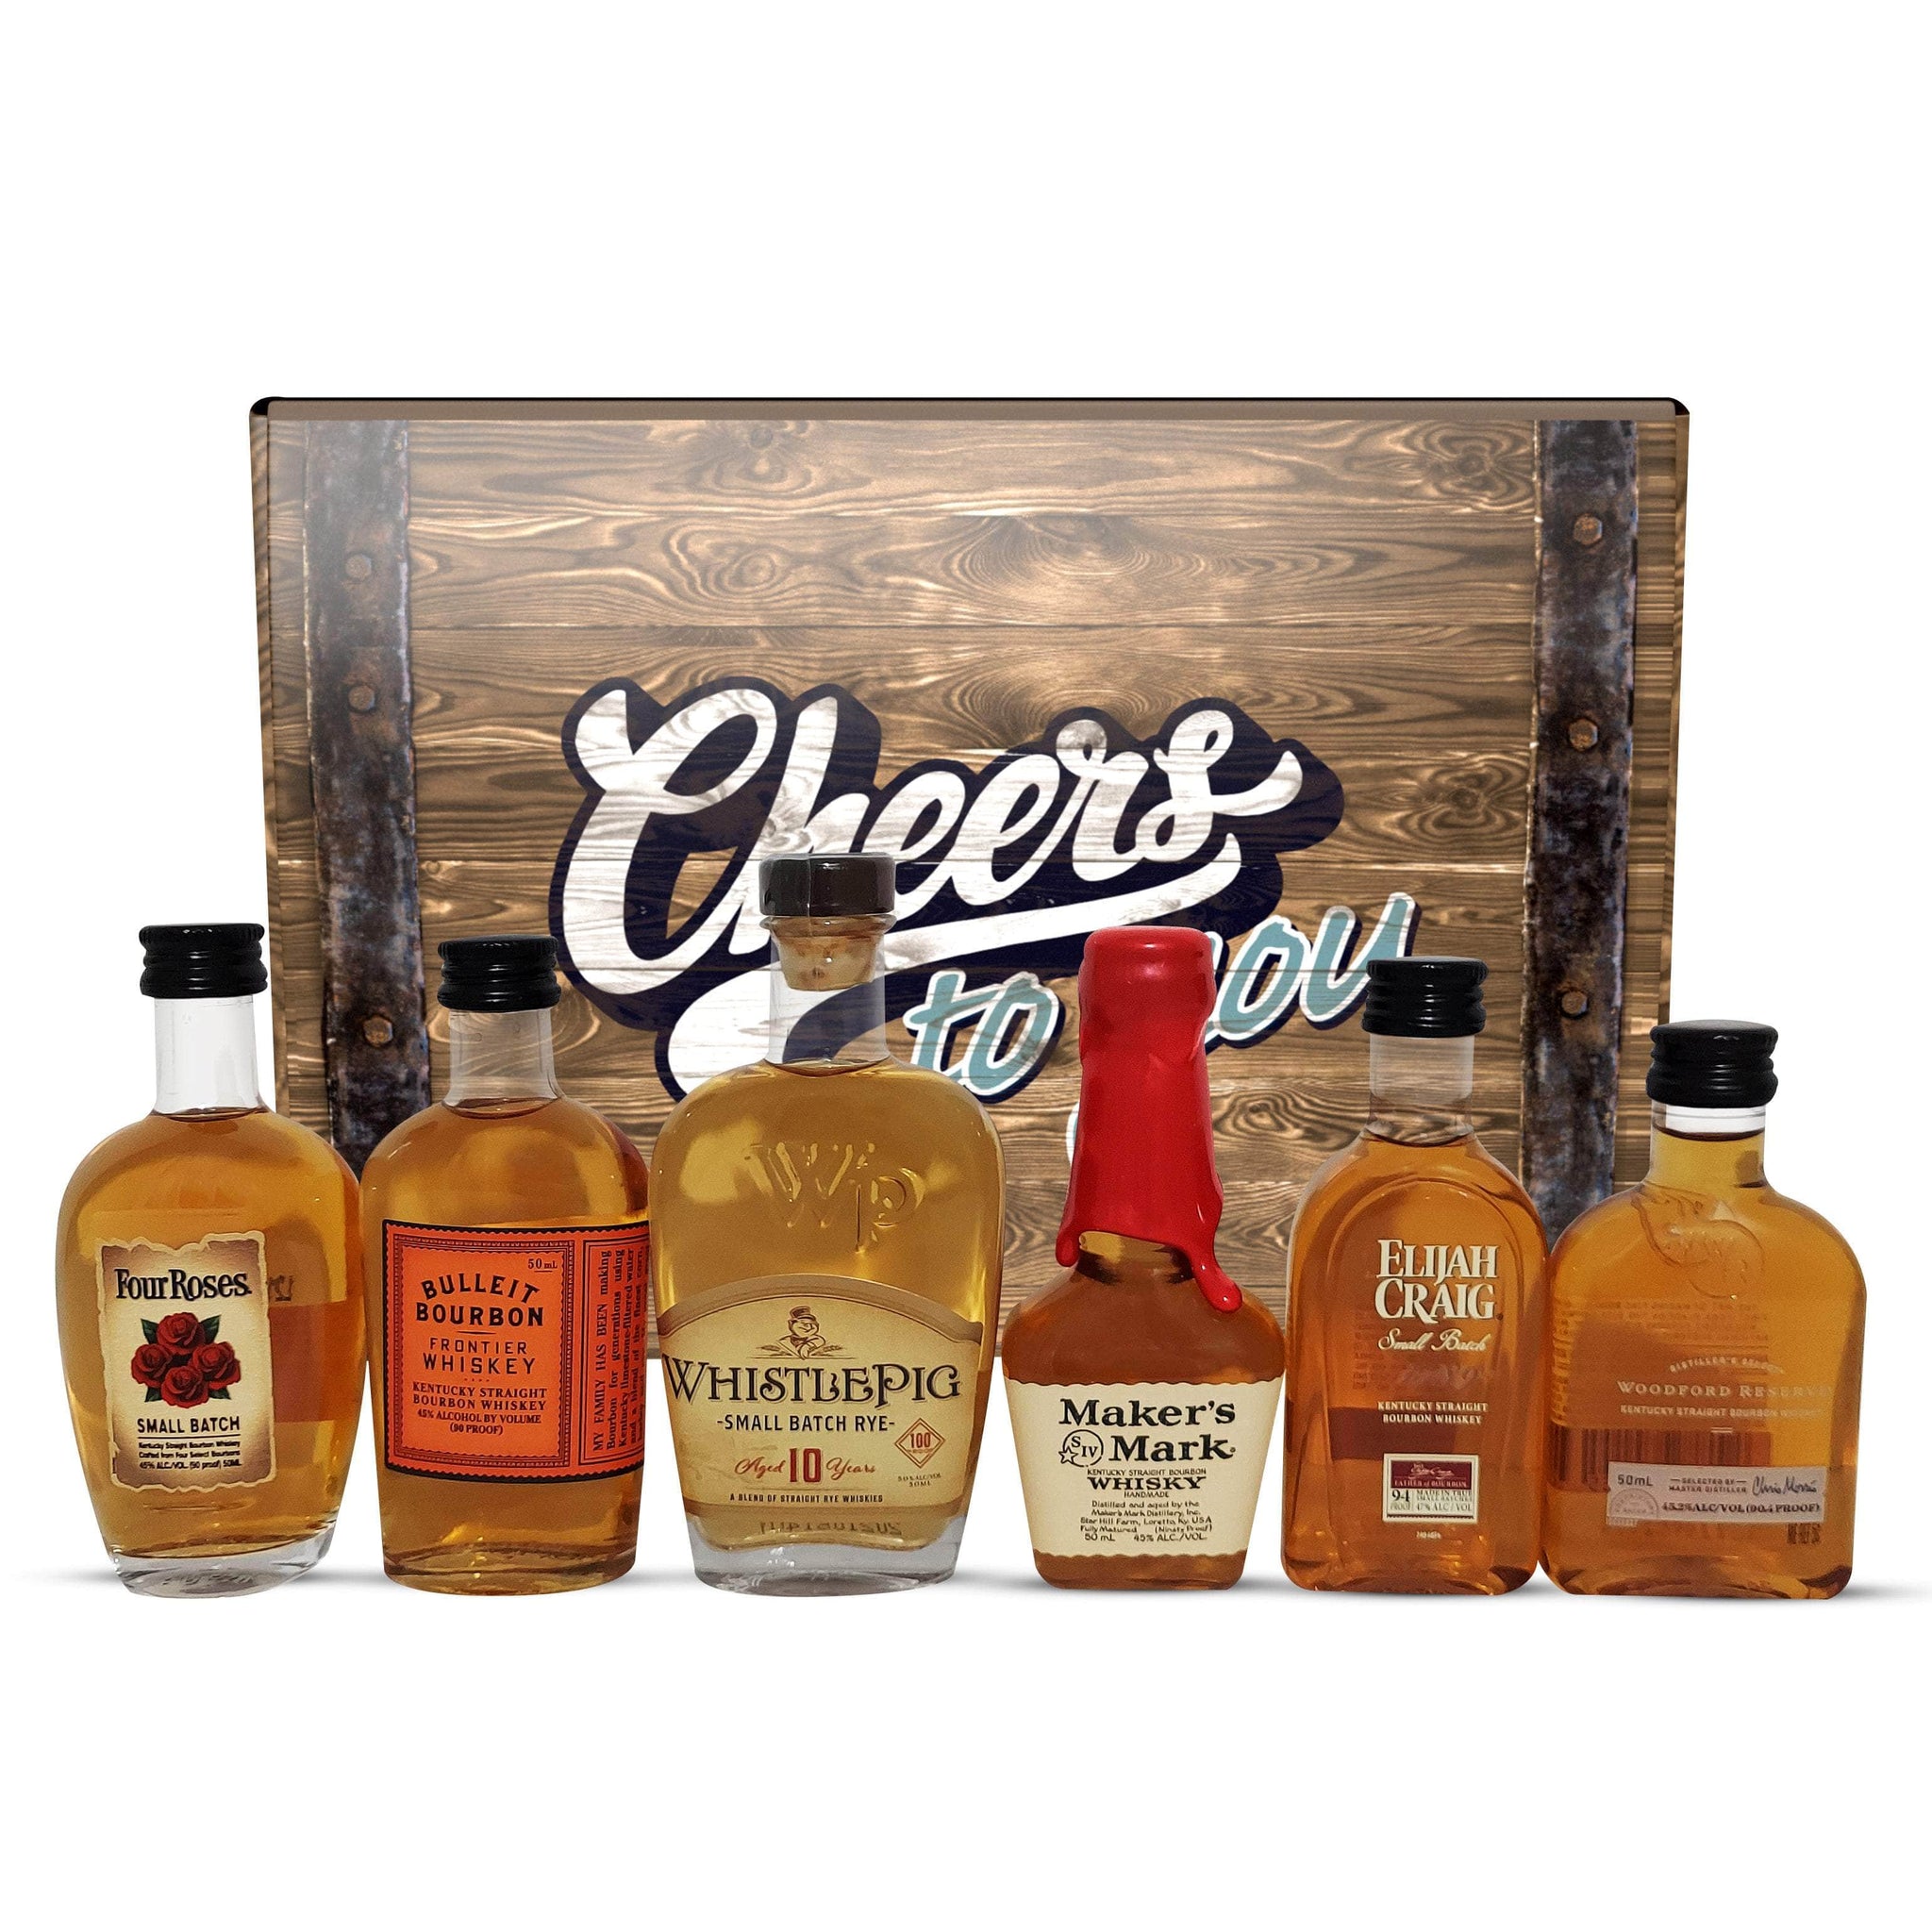 Old Partner Whiskey (6 x 700 ml) | Online Agency to Buy and Send Food,  Meat, Packages, Gift